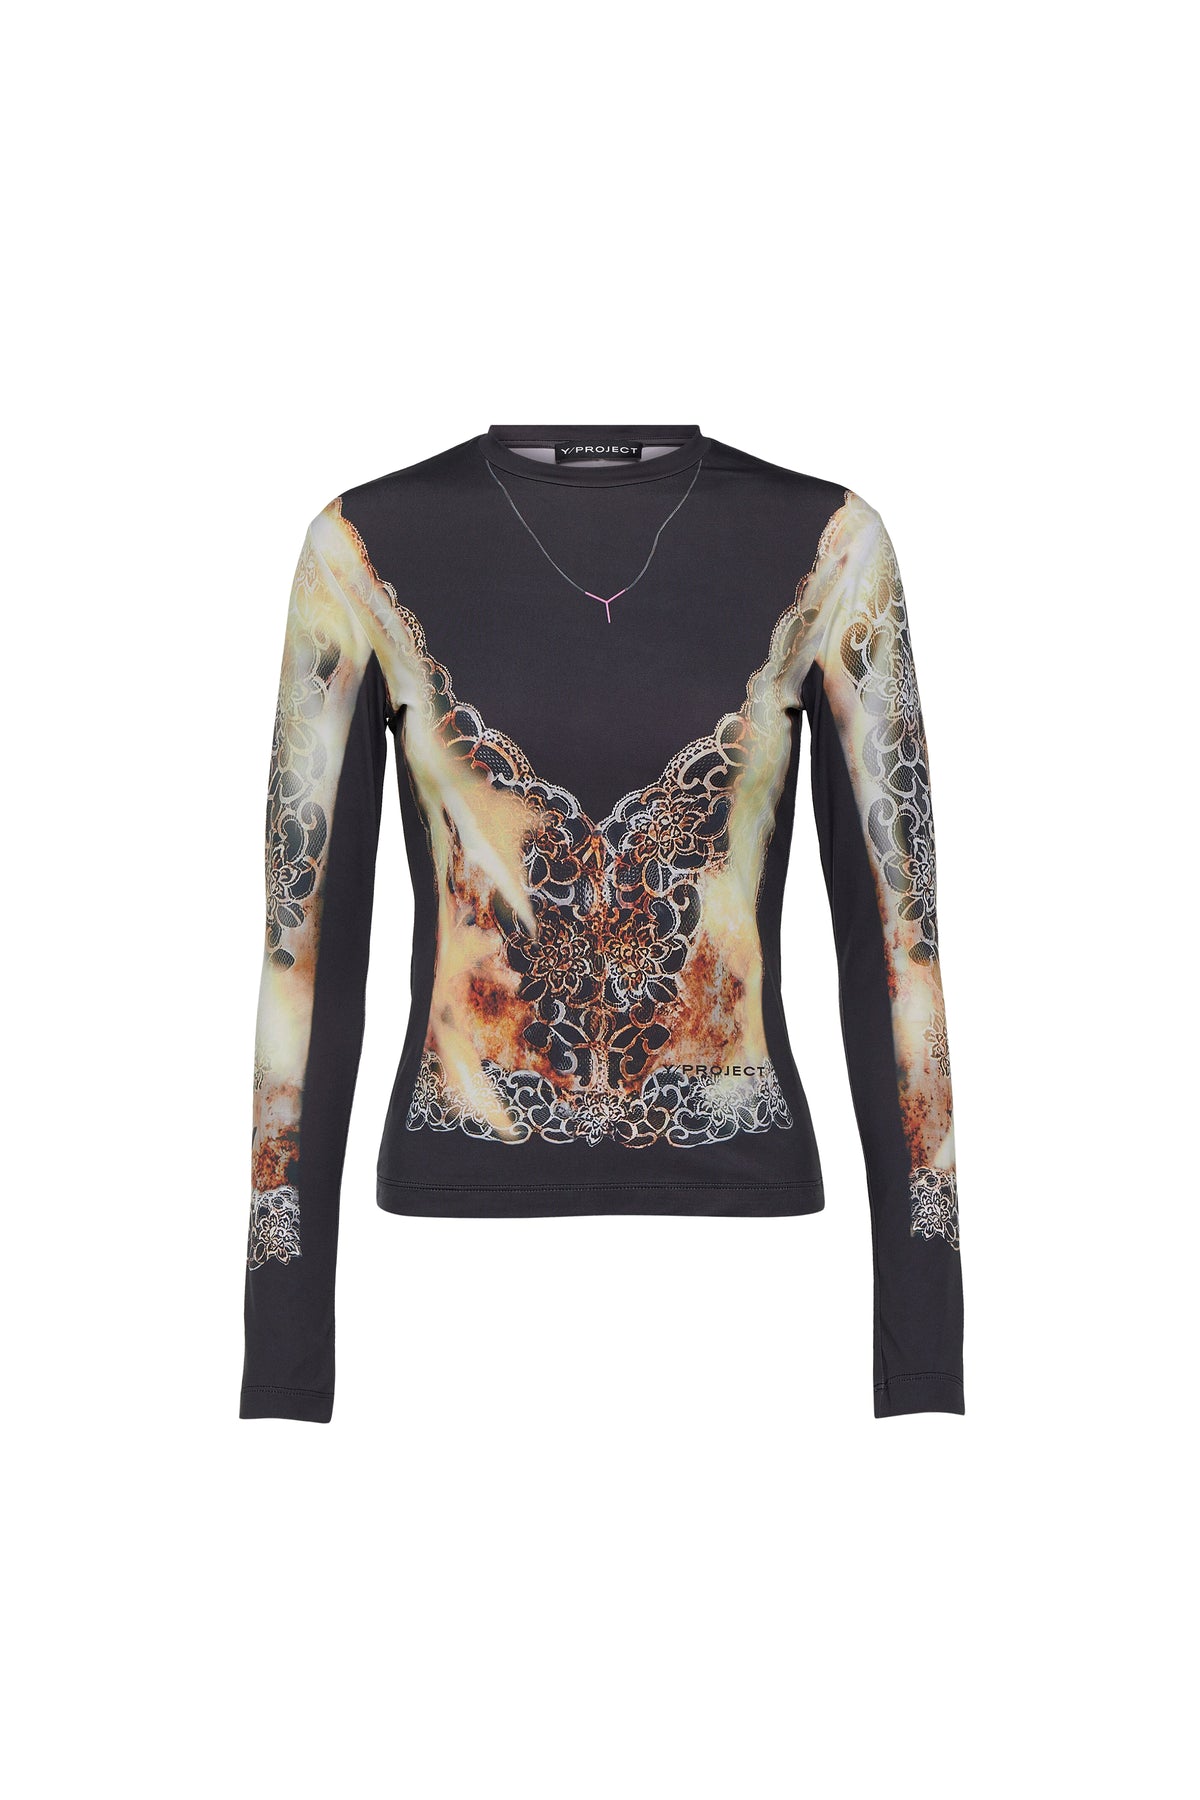 LACE PRINT LONG SLEEVE TOP / BLK